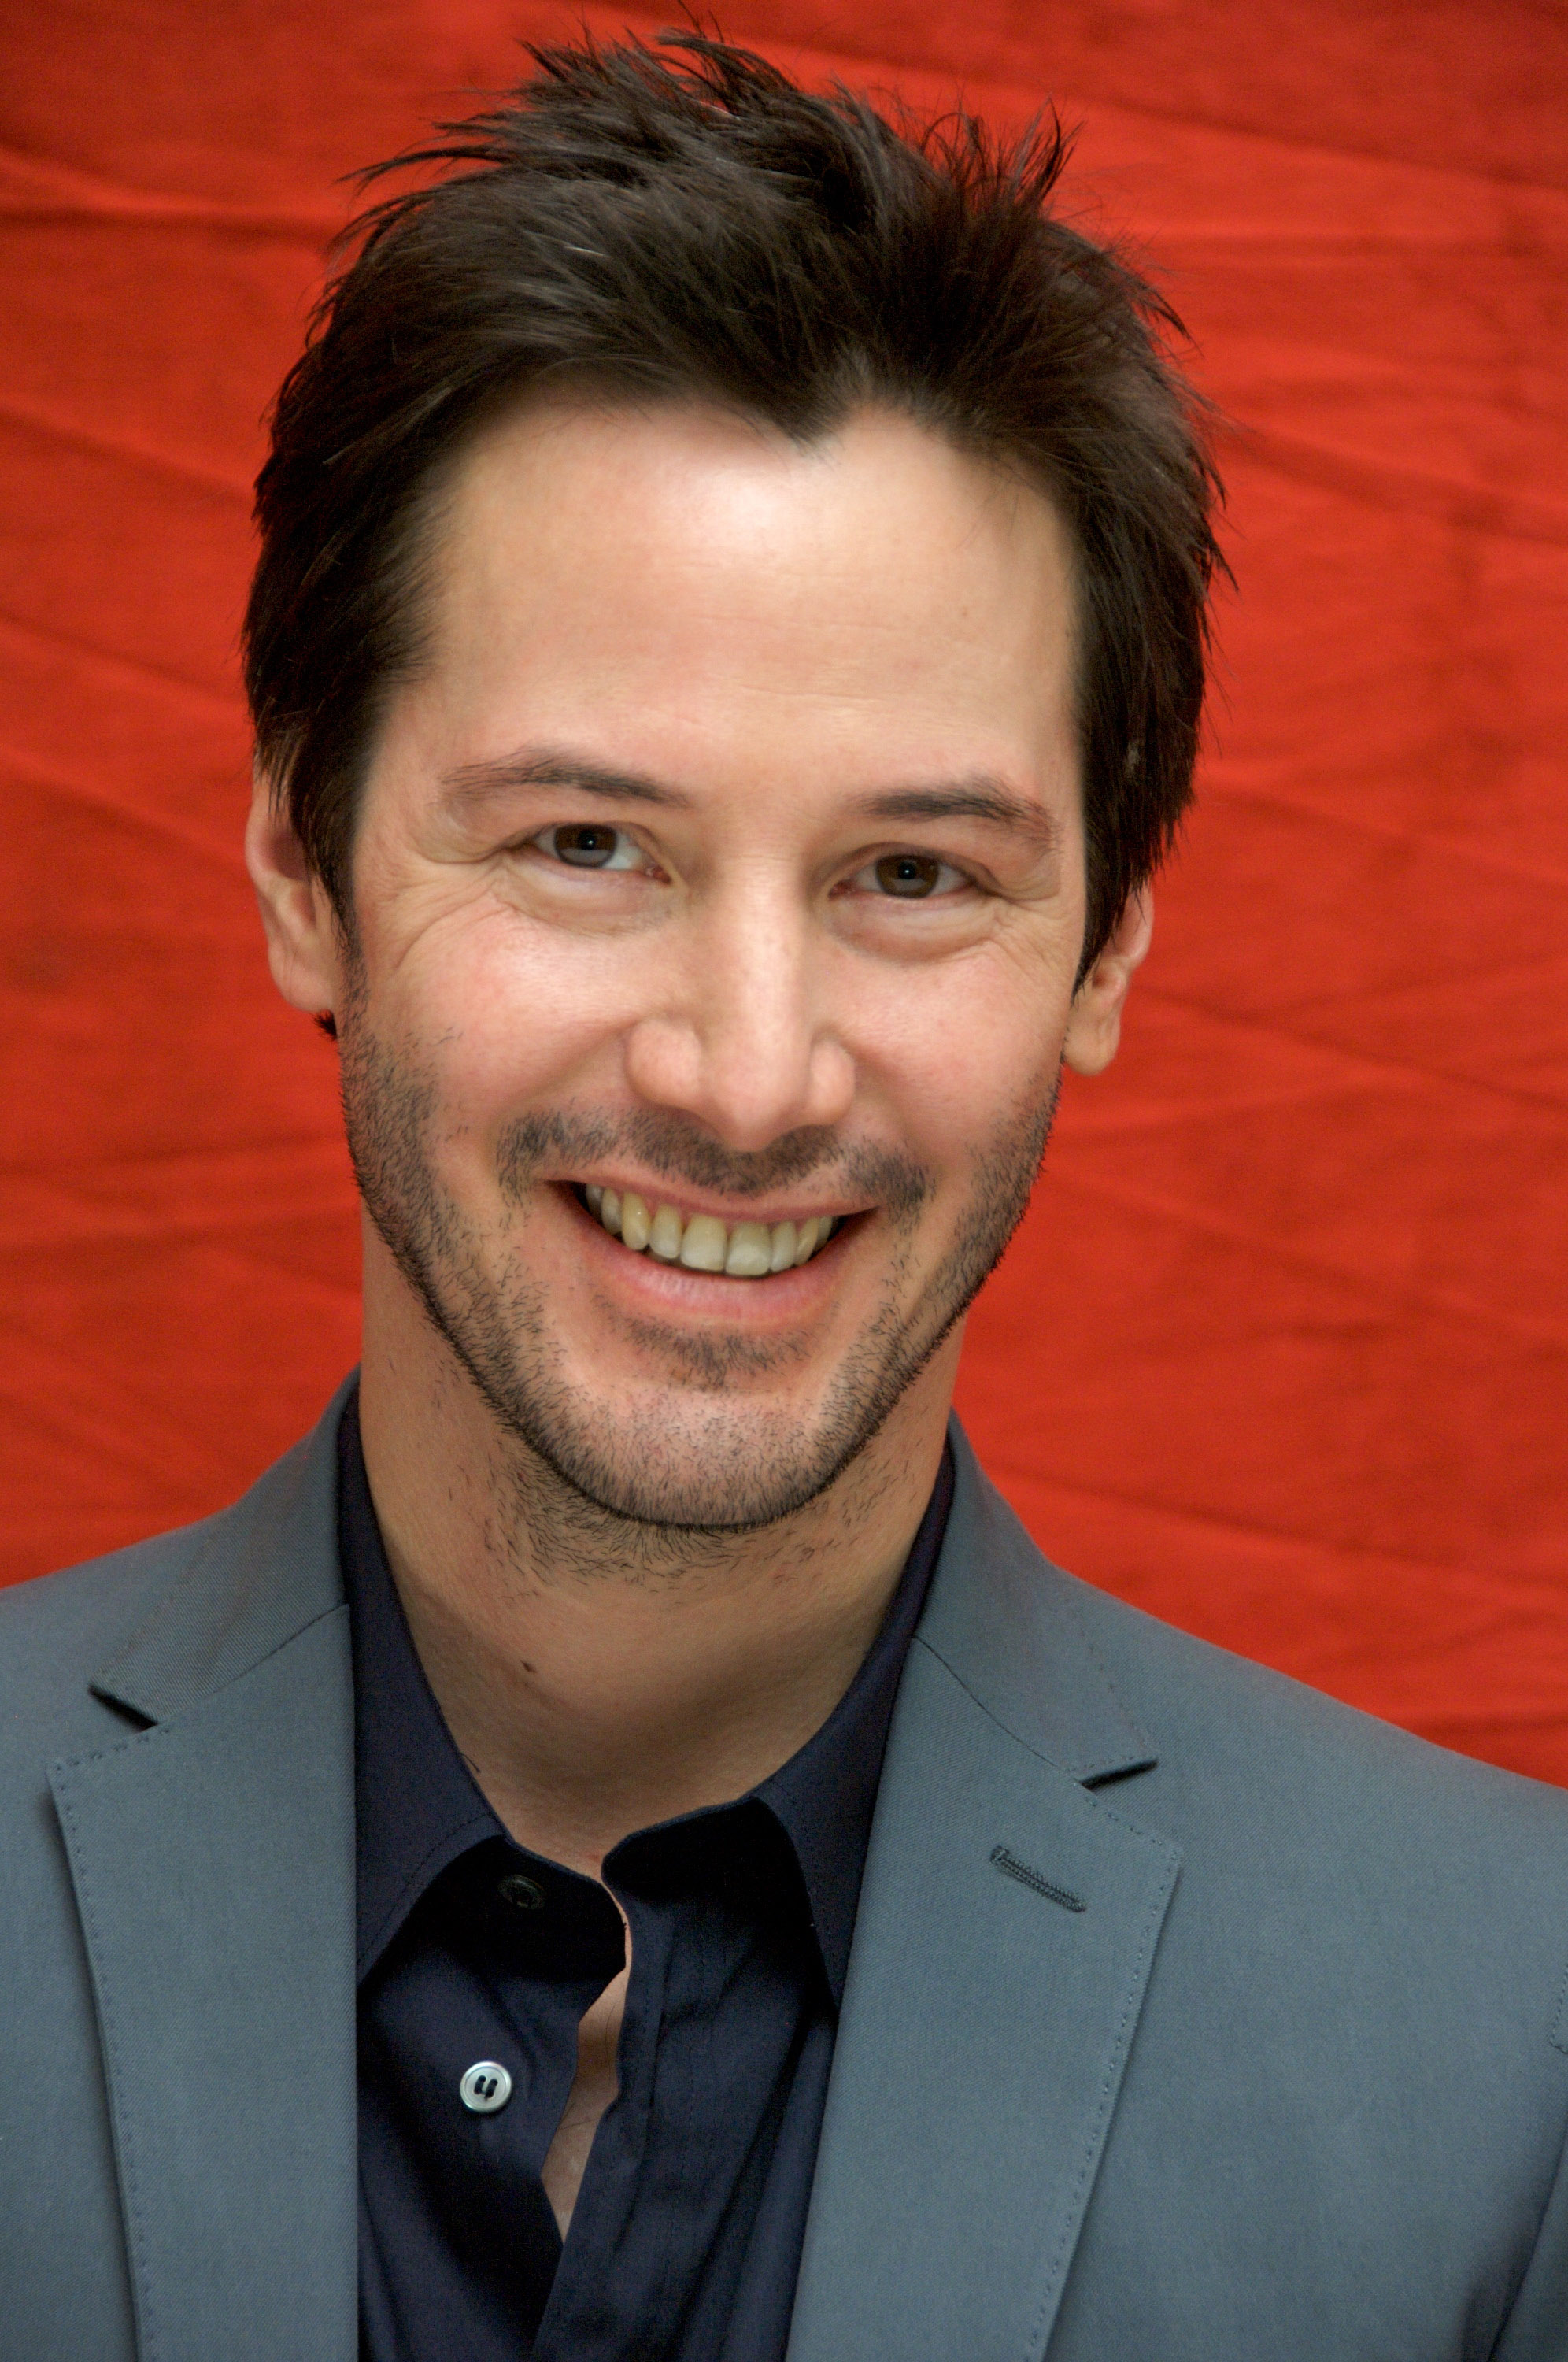 Keanu Reeves at the "Street Kings" press conference in Beverly Hills, California, on March 20, 2008. | Source: Getty Images